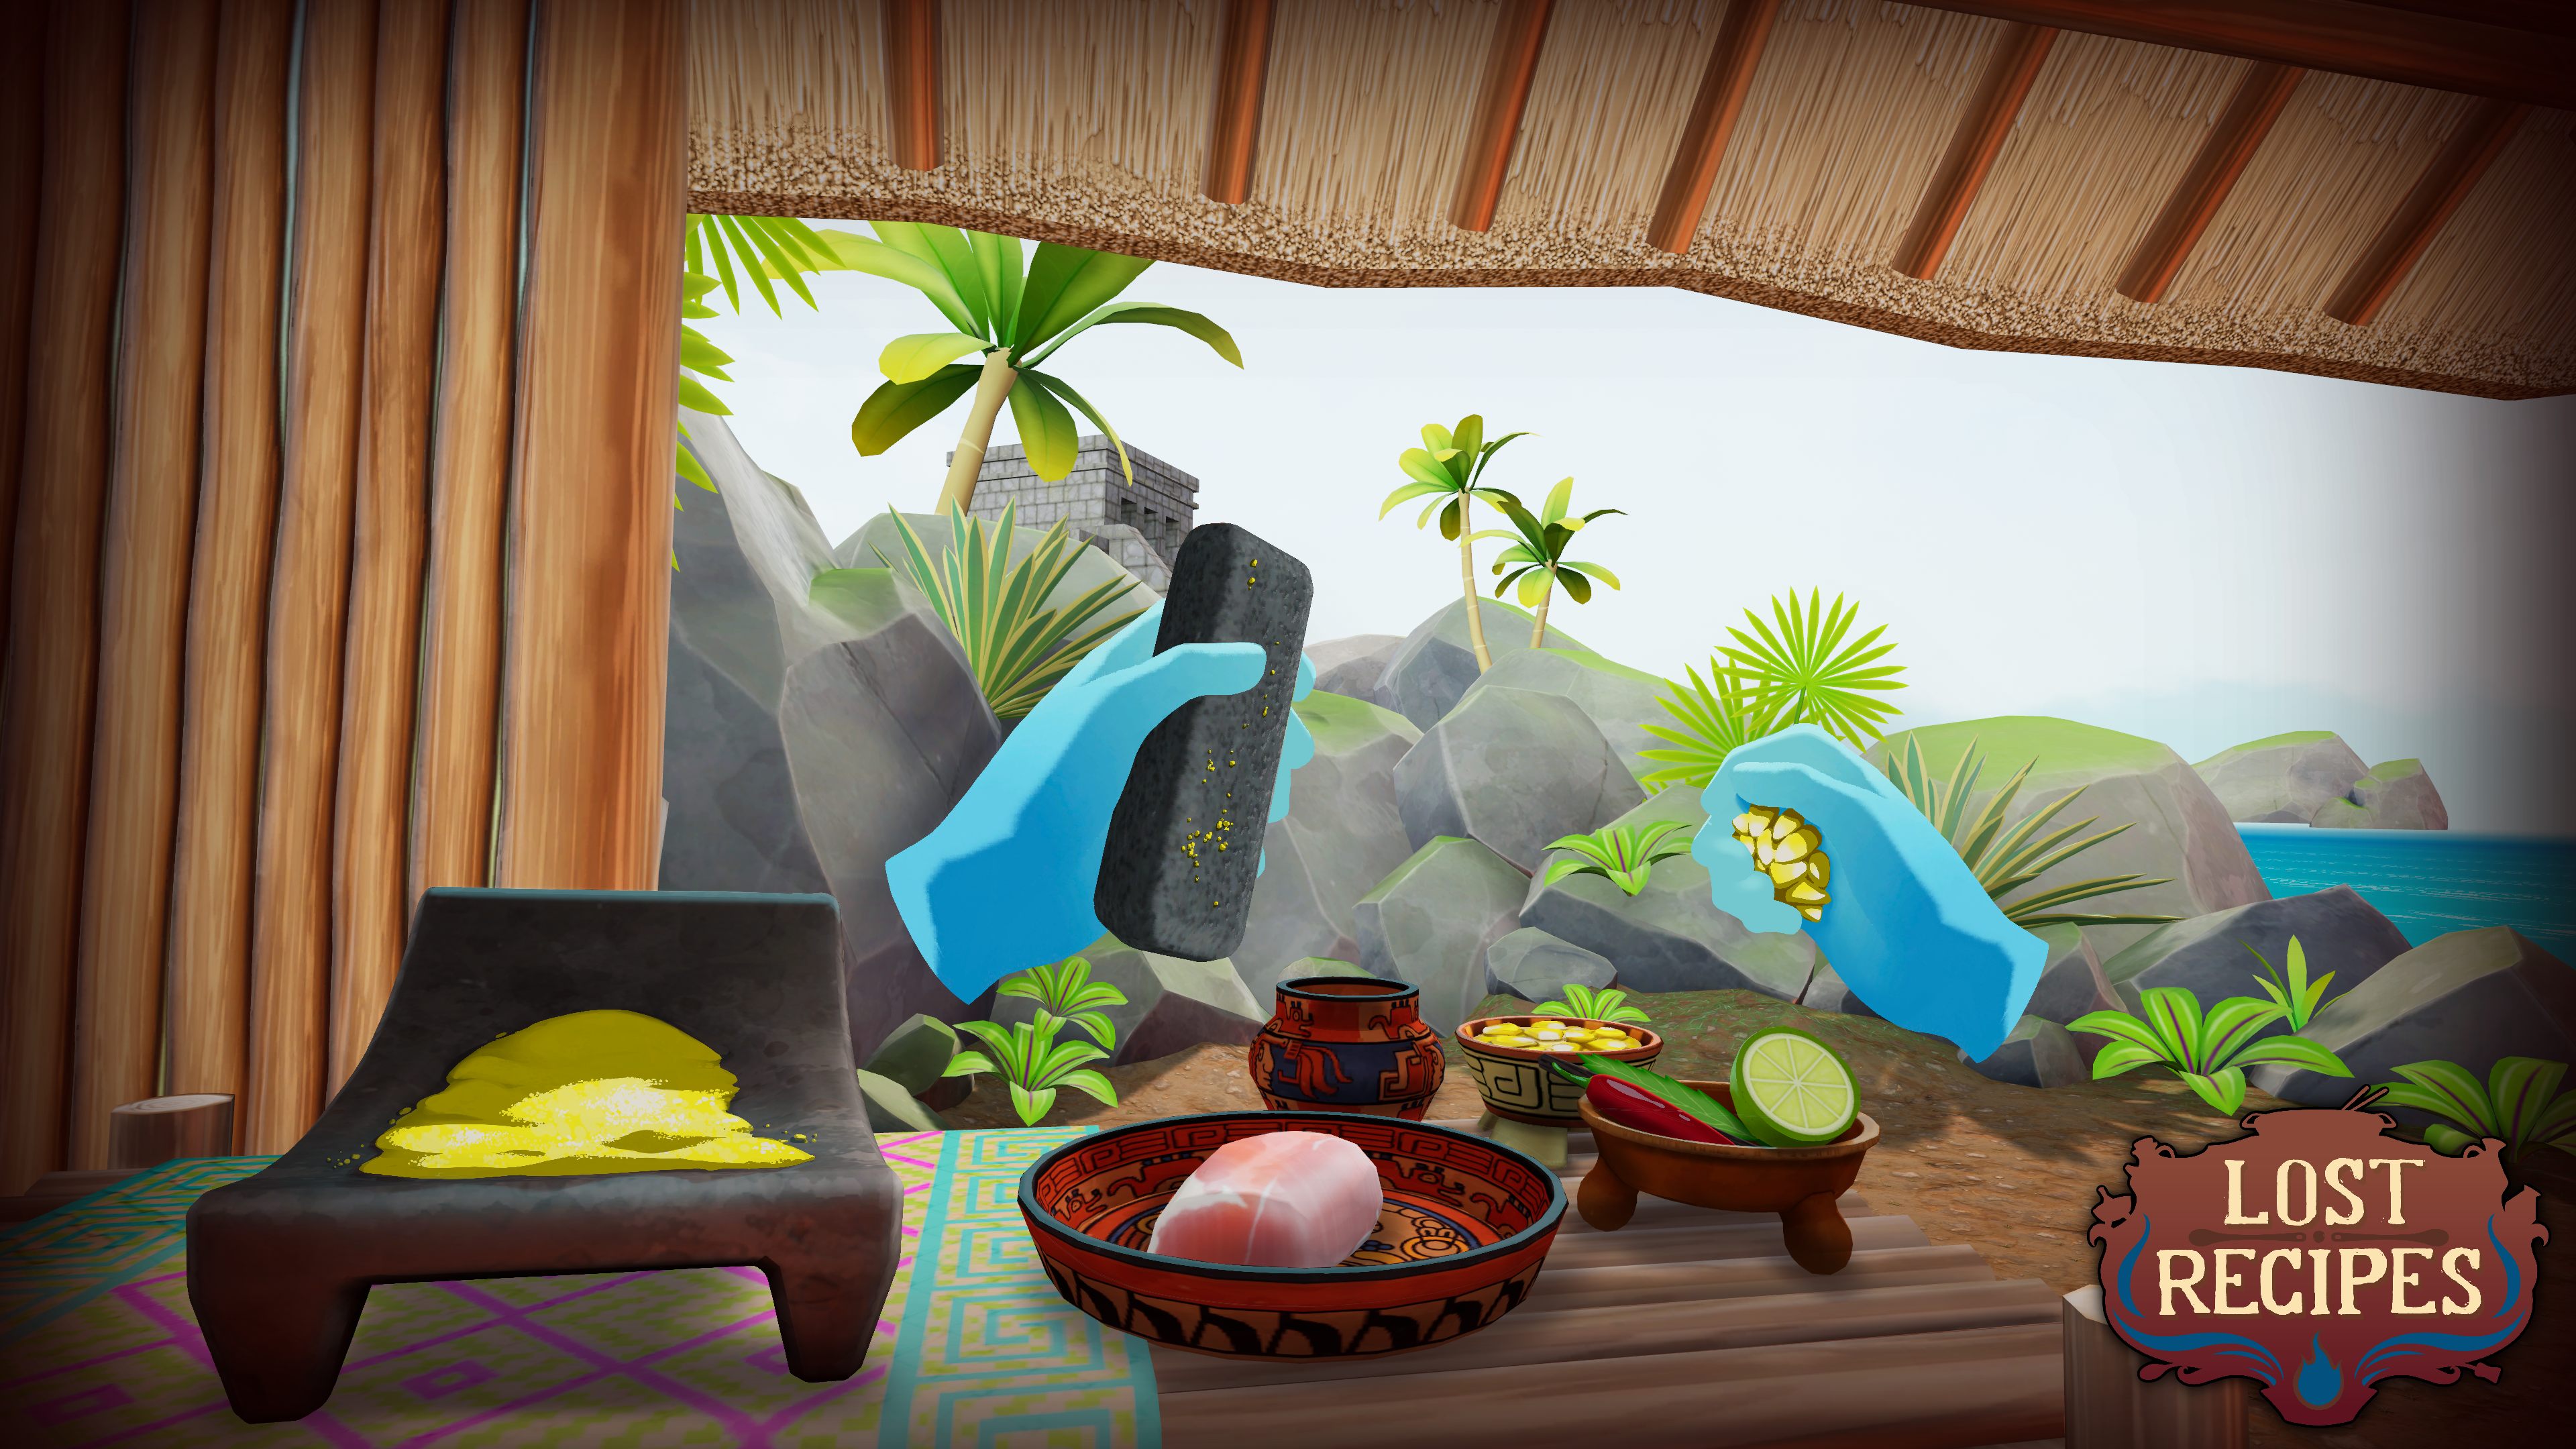 Upcoming VR Game Lost Recipes Has You Cooking For Ghosts - VRScout